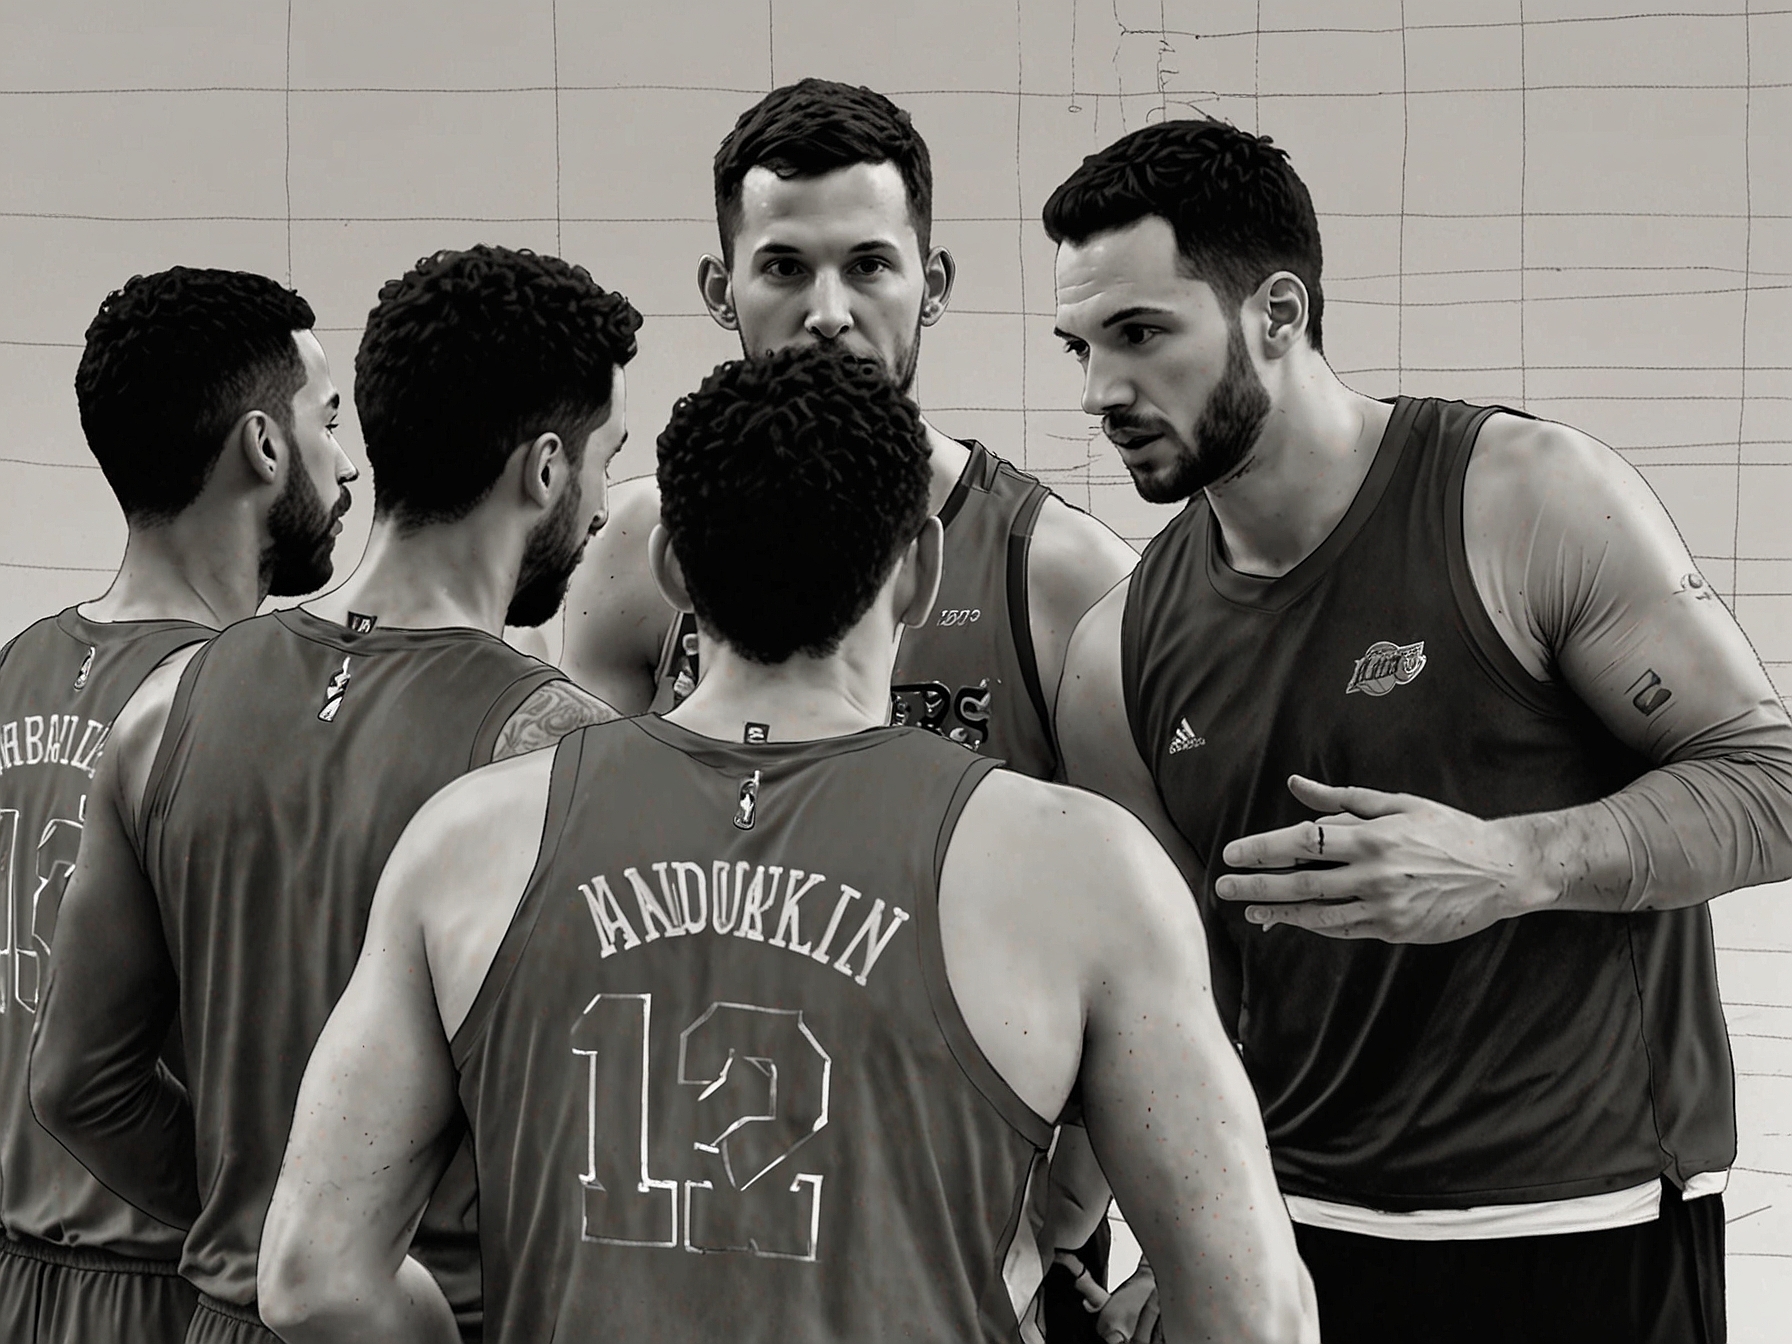 The Lakers' team huddles together during a practice session, with JJ Redick visible at the forefront, directing and discussing strategies, highlighting his transition from analyst to head coach.